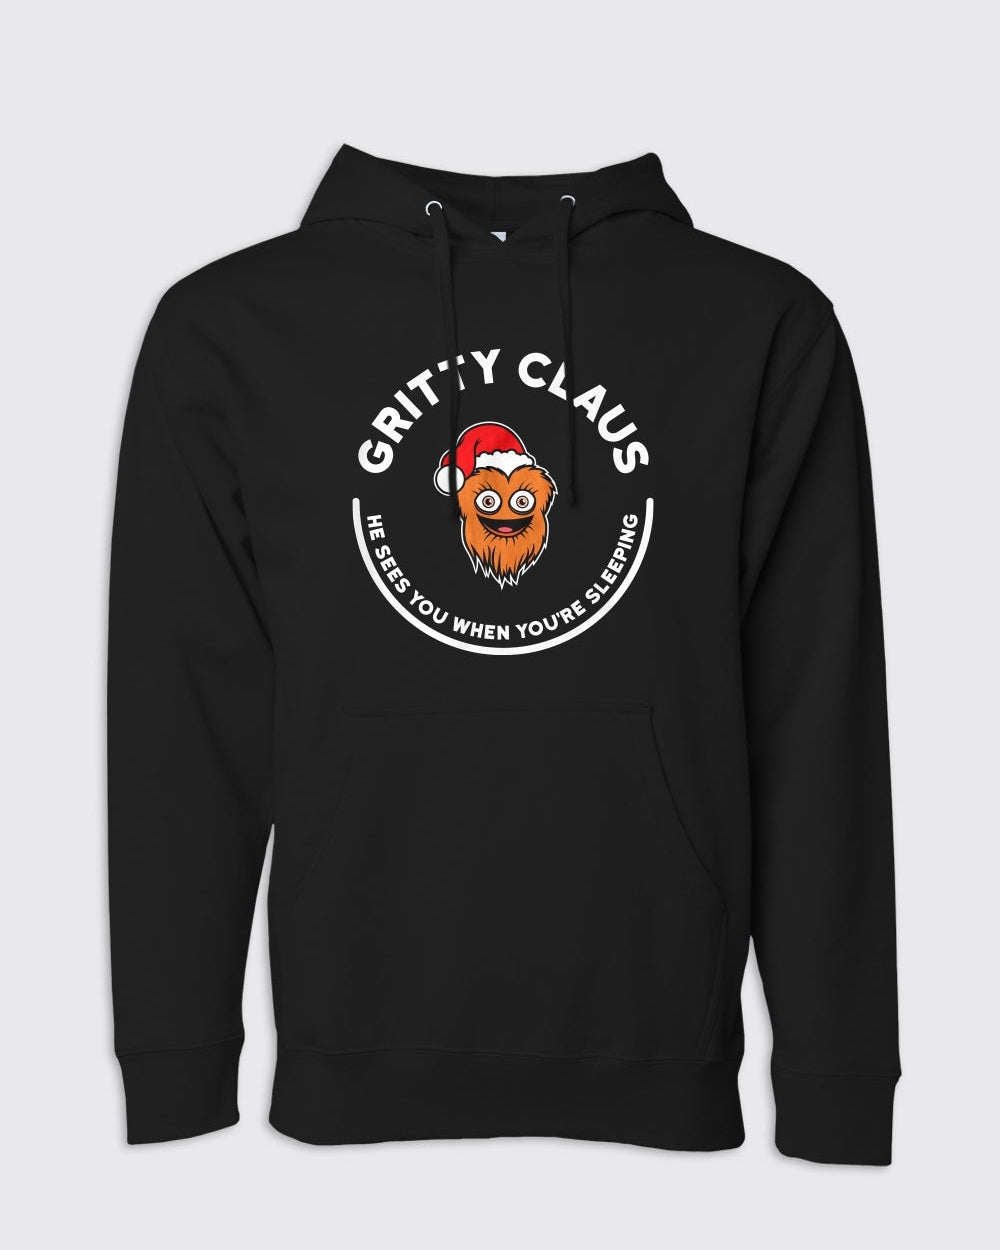 Philadelphia Flyers-Gritty Claus Hoodie-S-Philly Sports Shirts